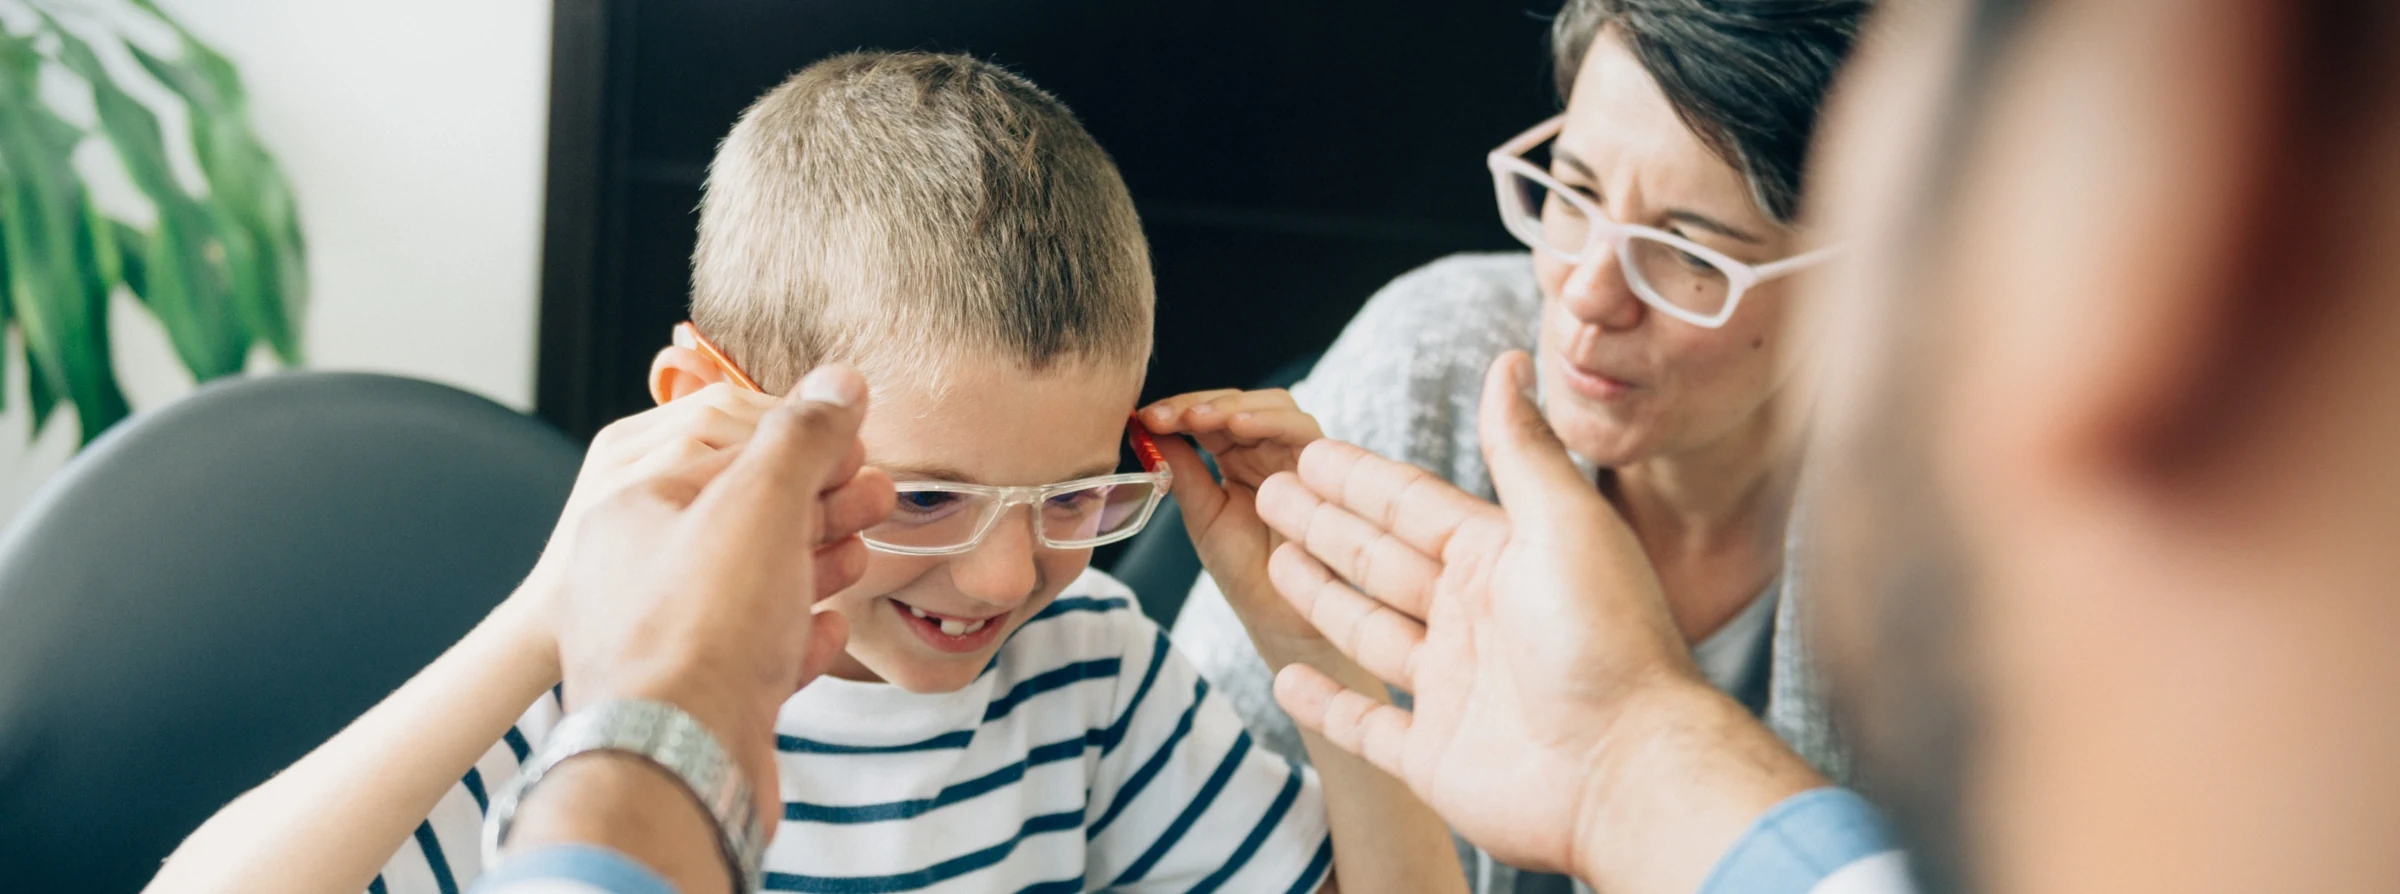 Young boy receiving glasses from doctor